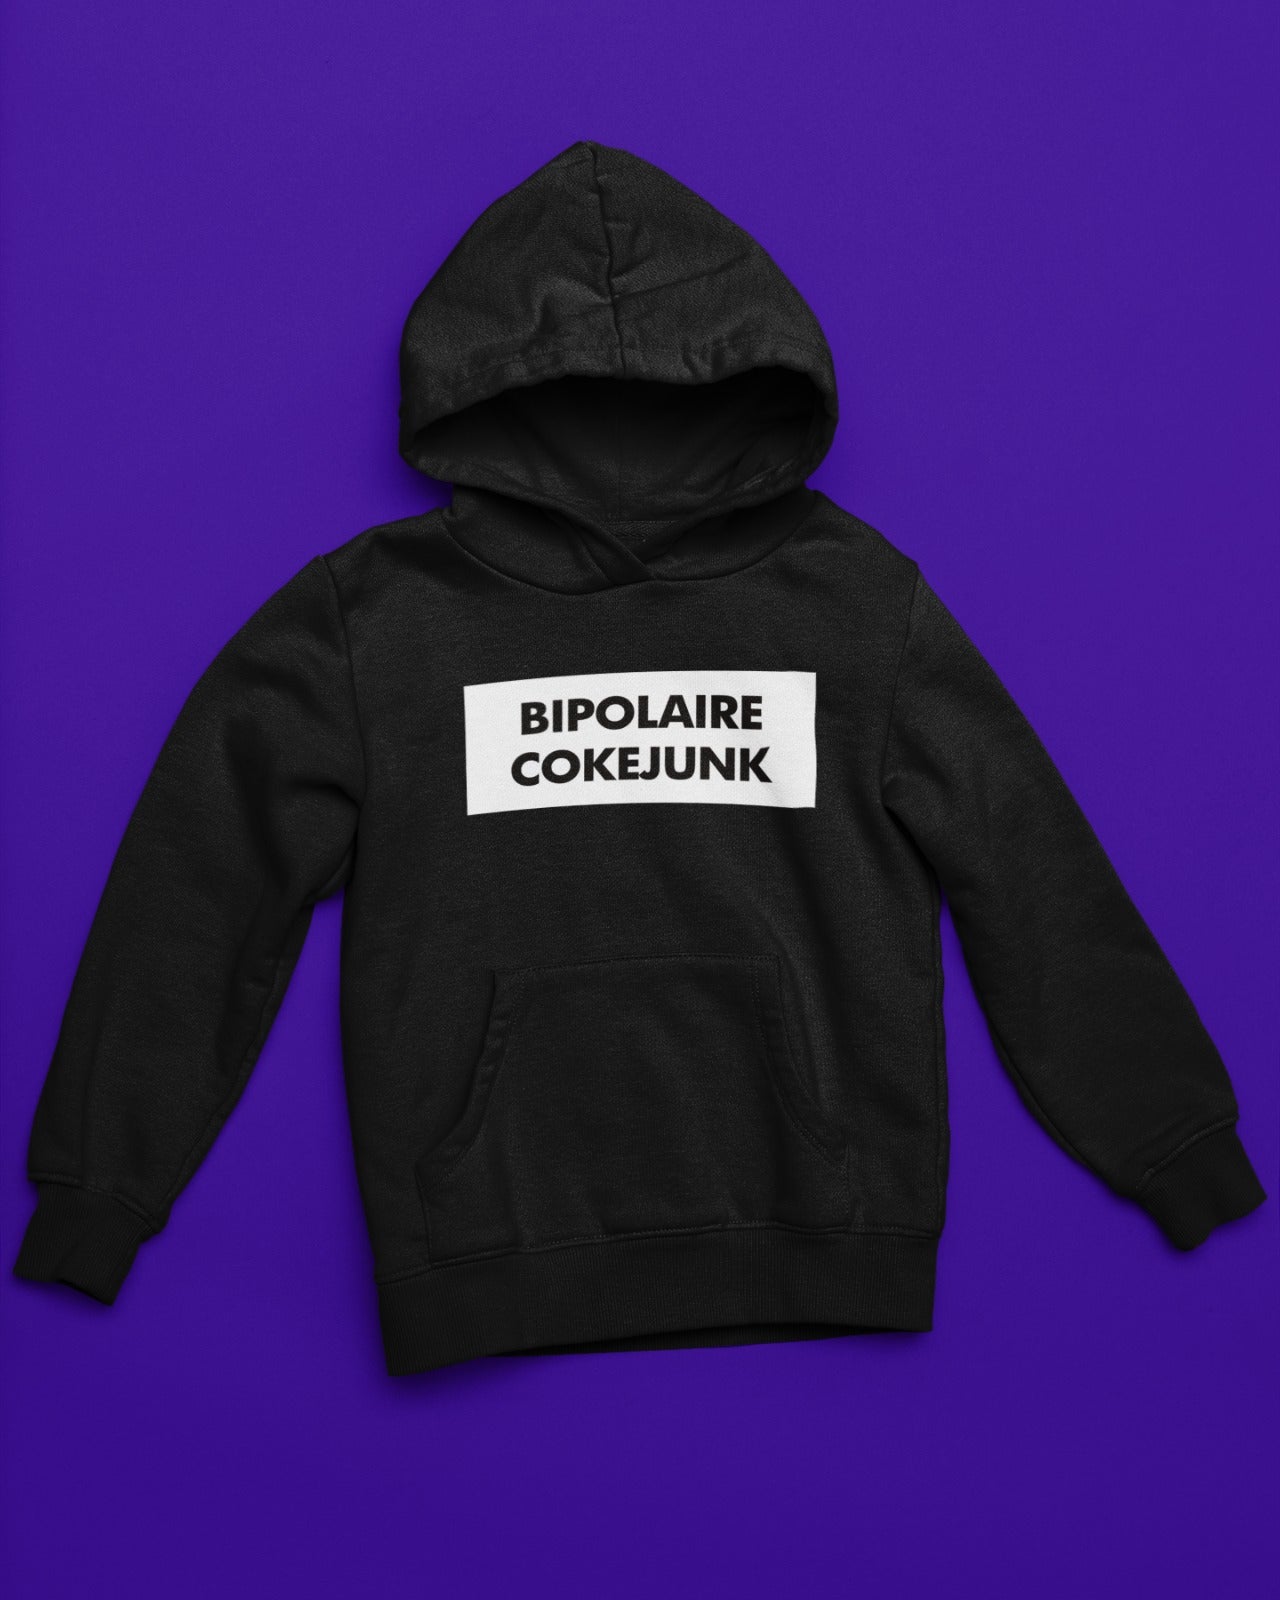 Bipolaire cokejunk - HOODIE